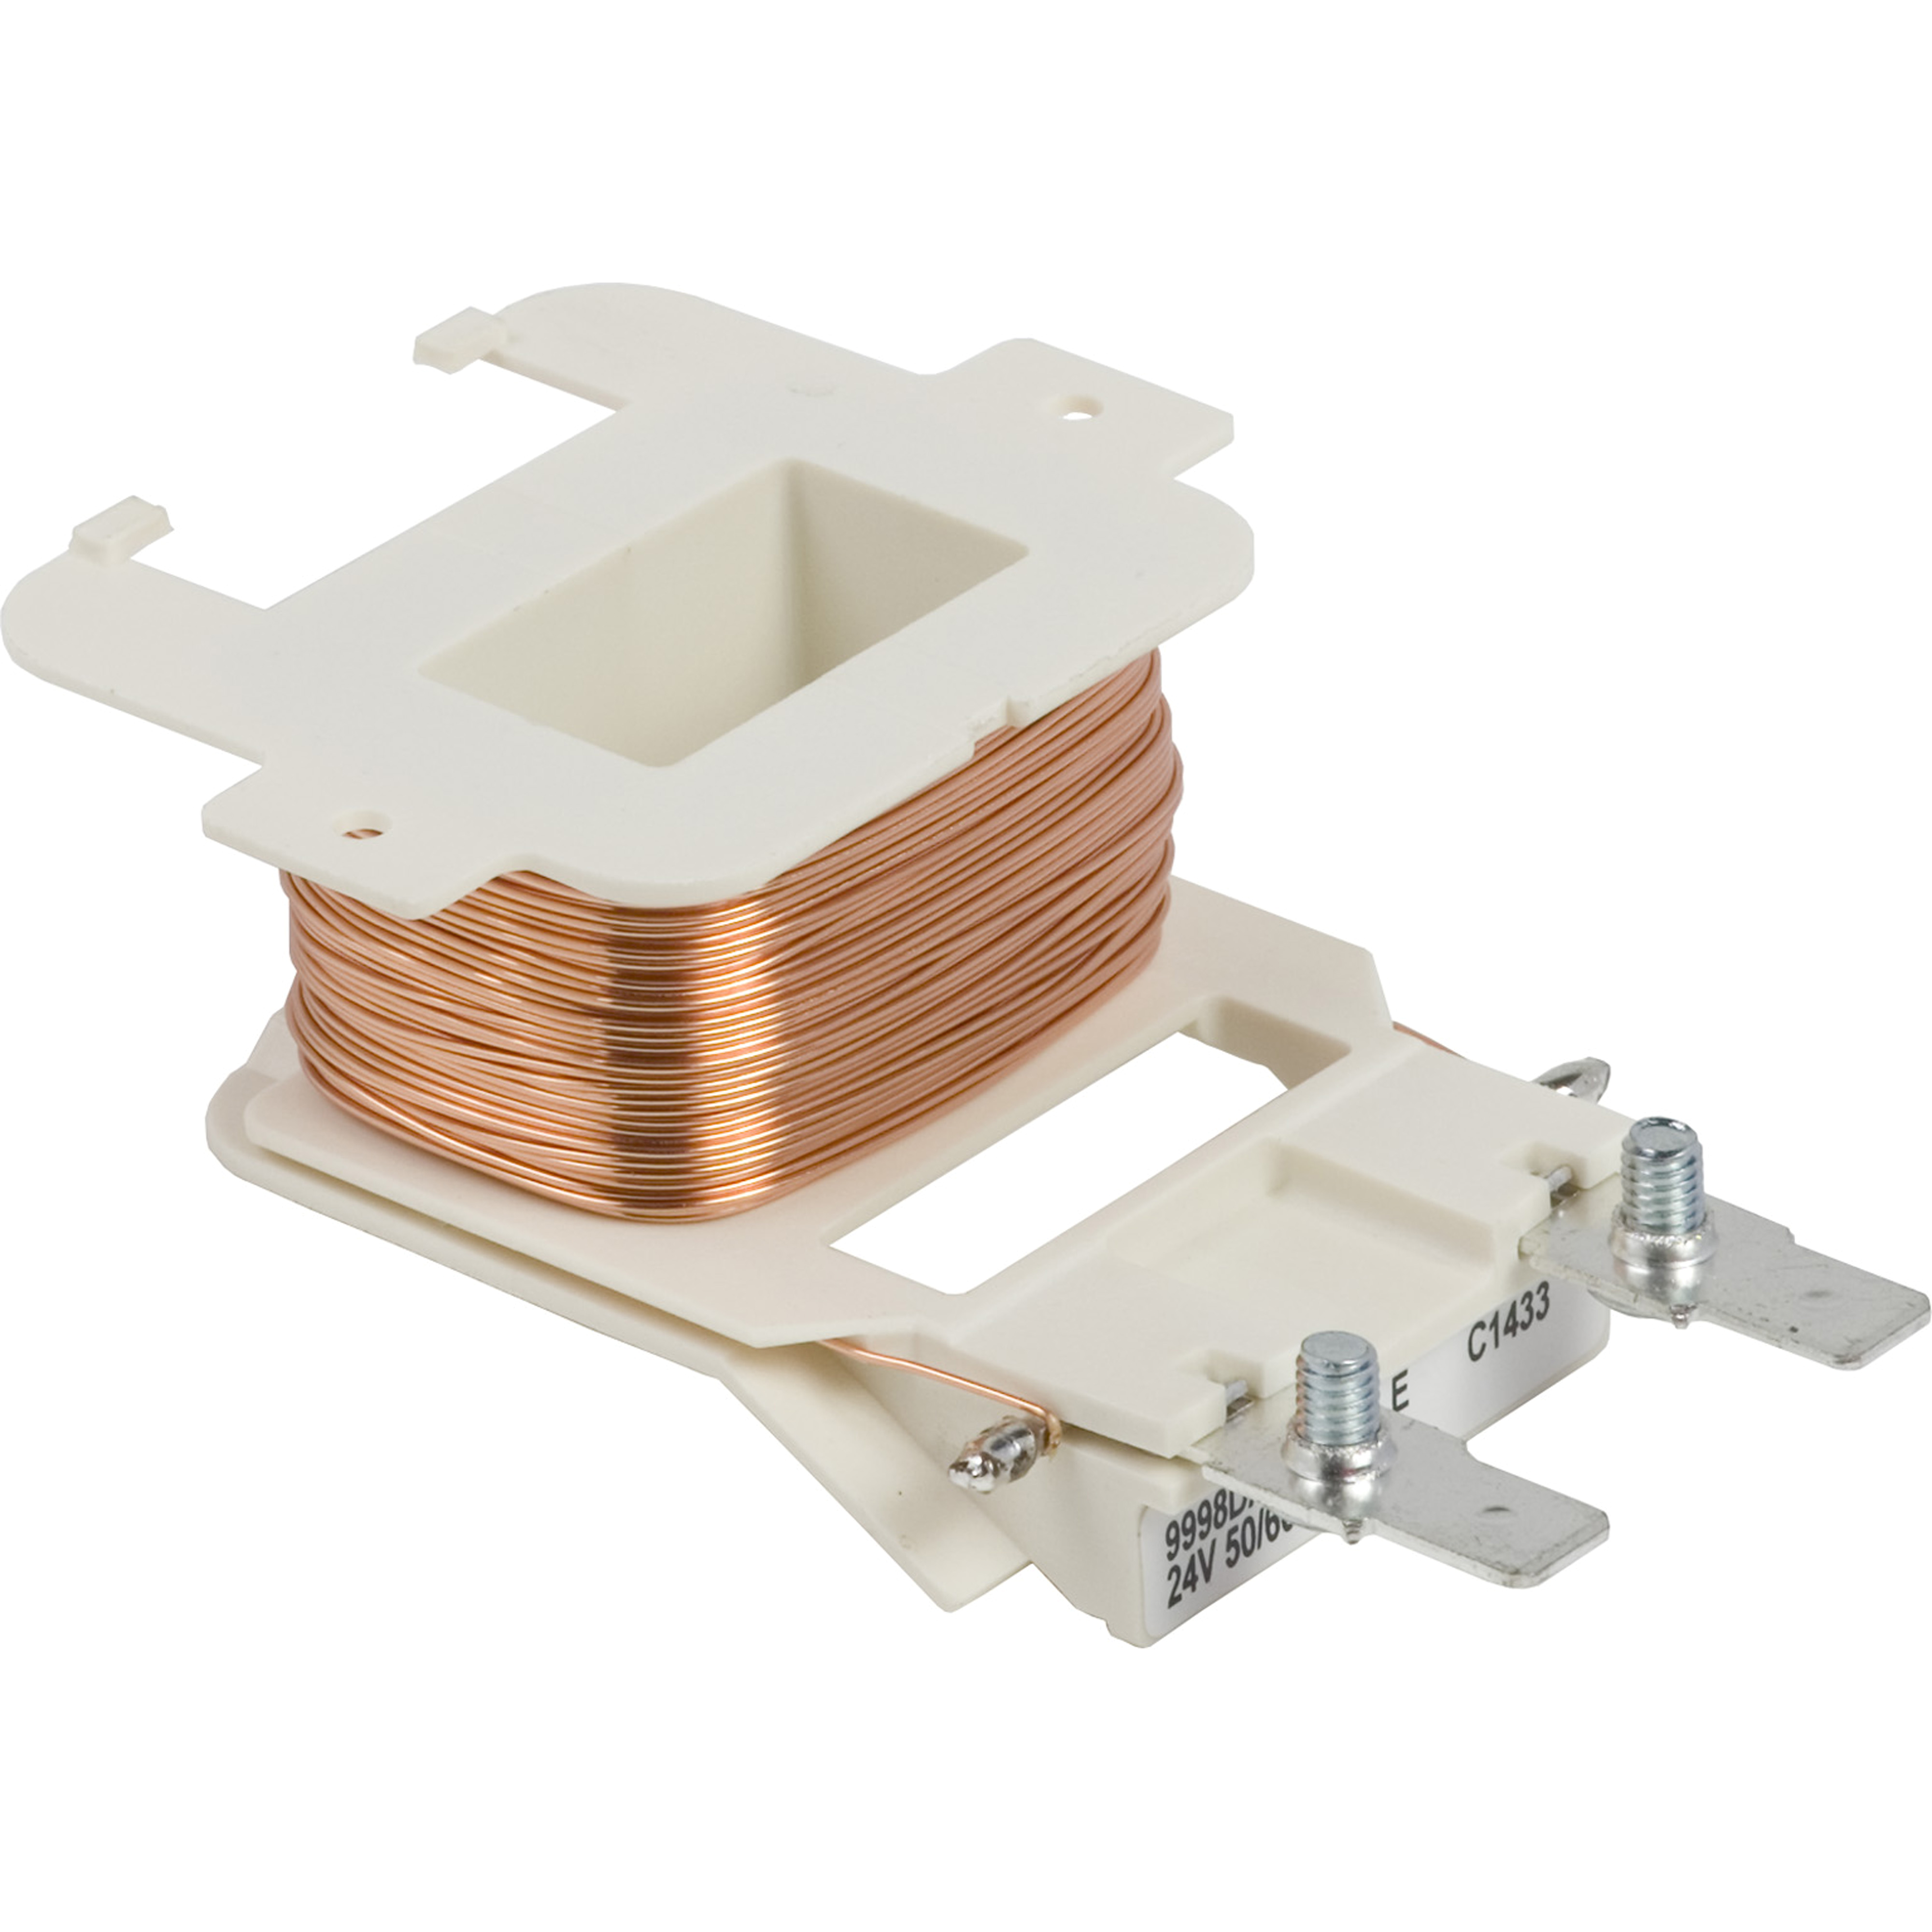 Contactor, Definite Purpose, replacement coil, 440/480VAC 50/60Hz, for 8910DPA 50A and 60A contactors, 2 and 3 poles